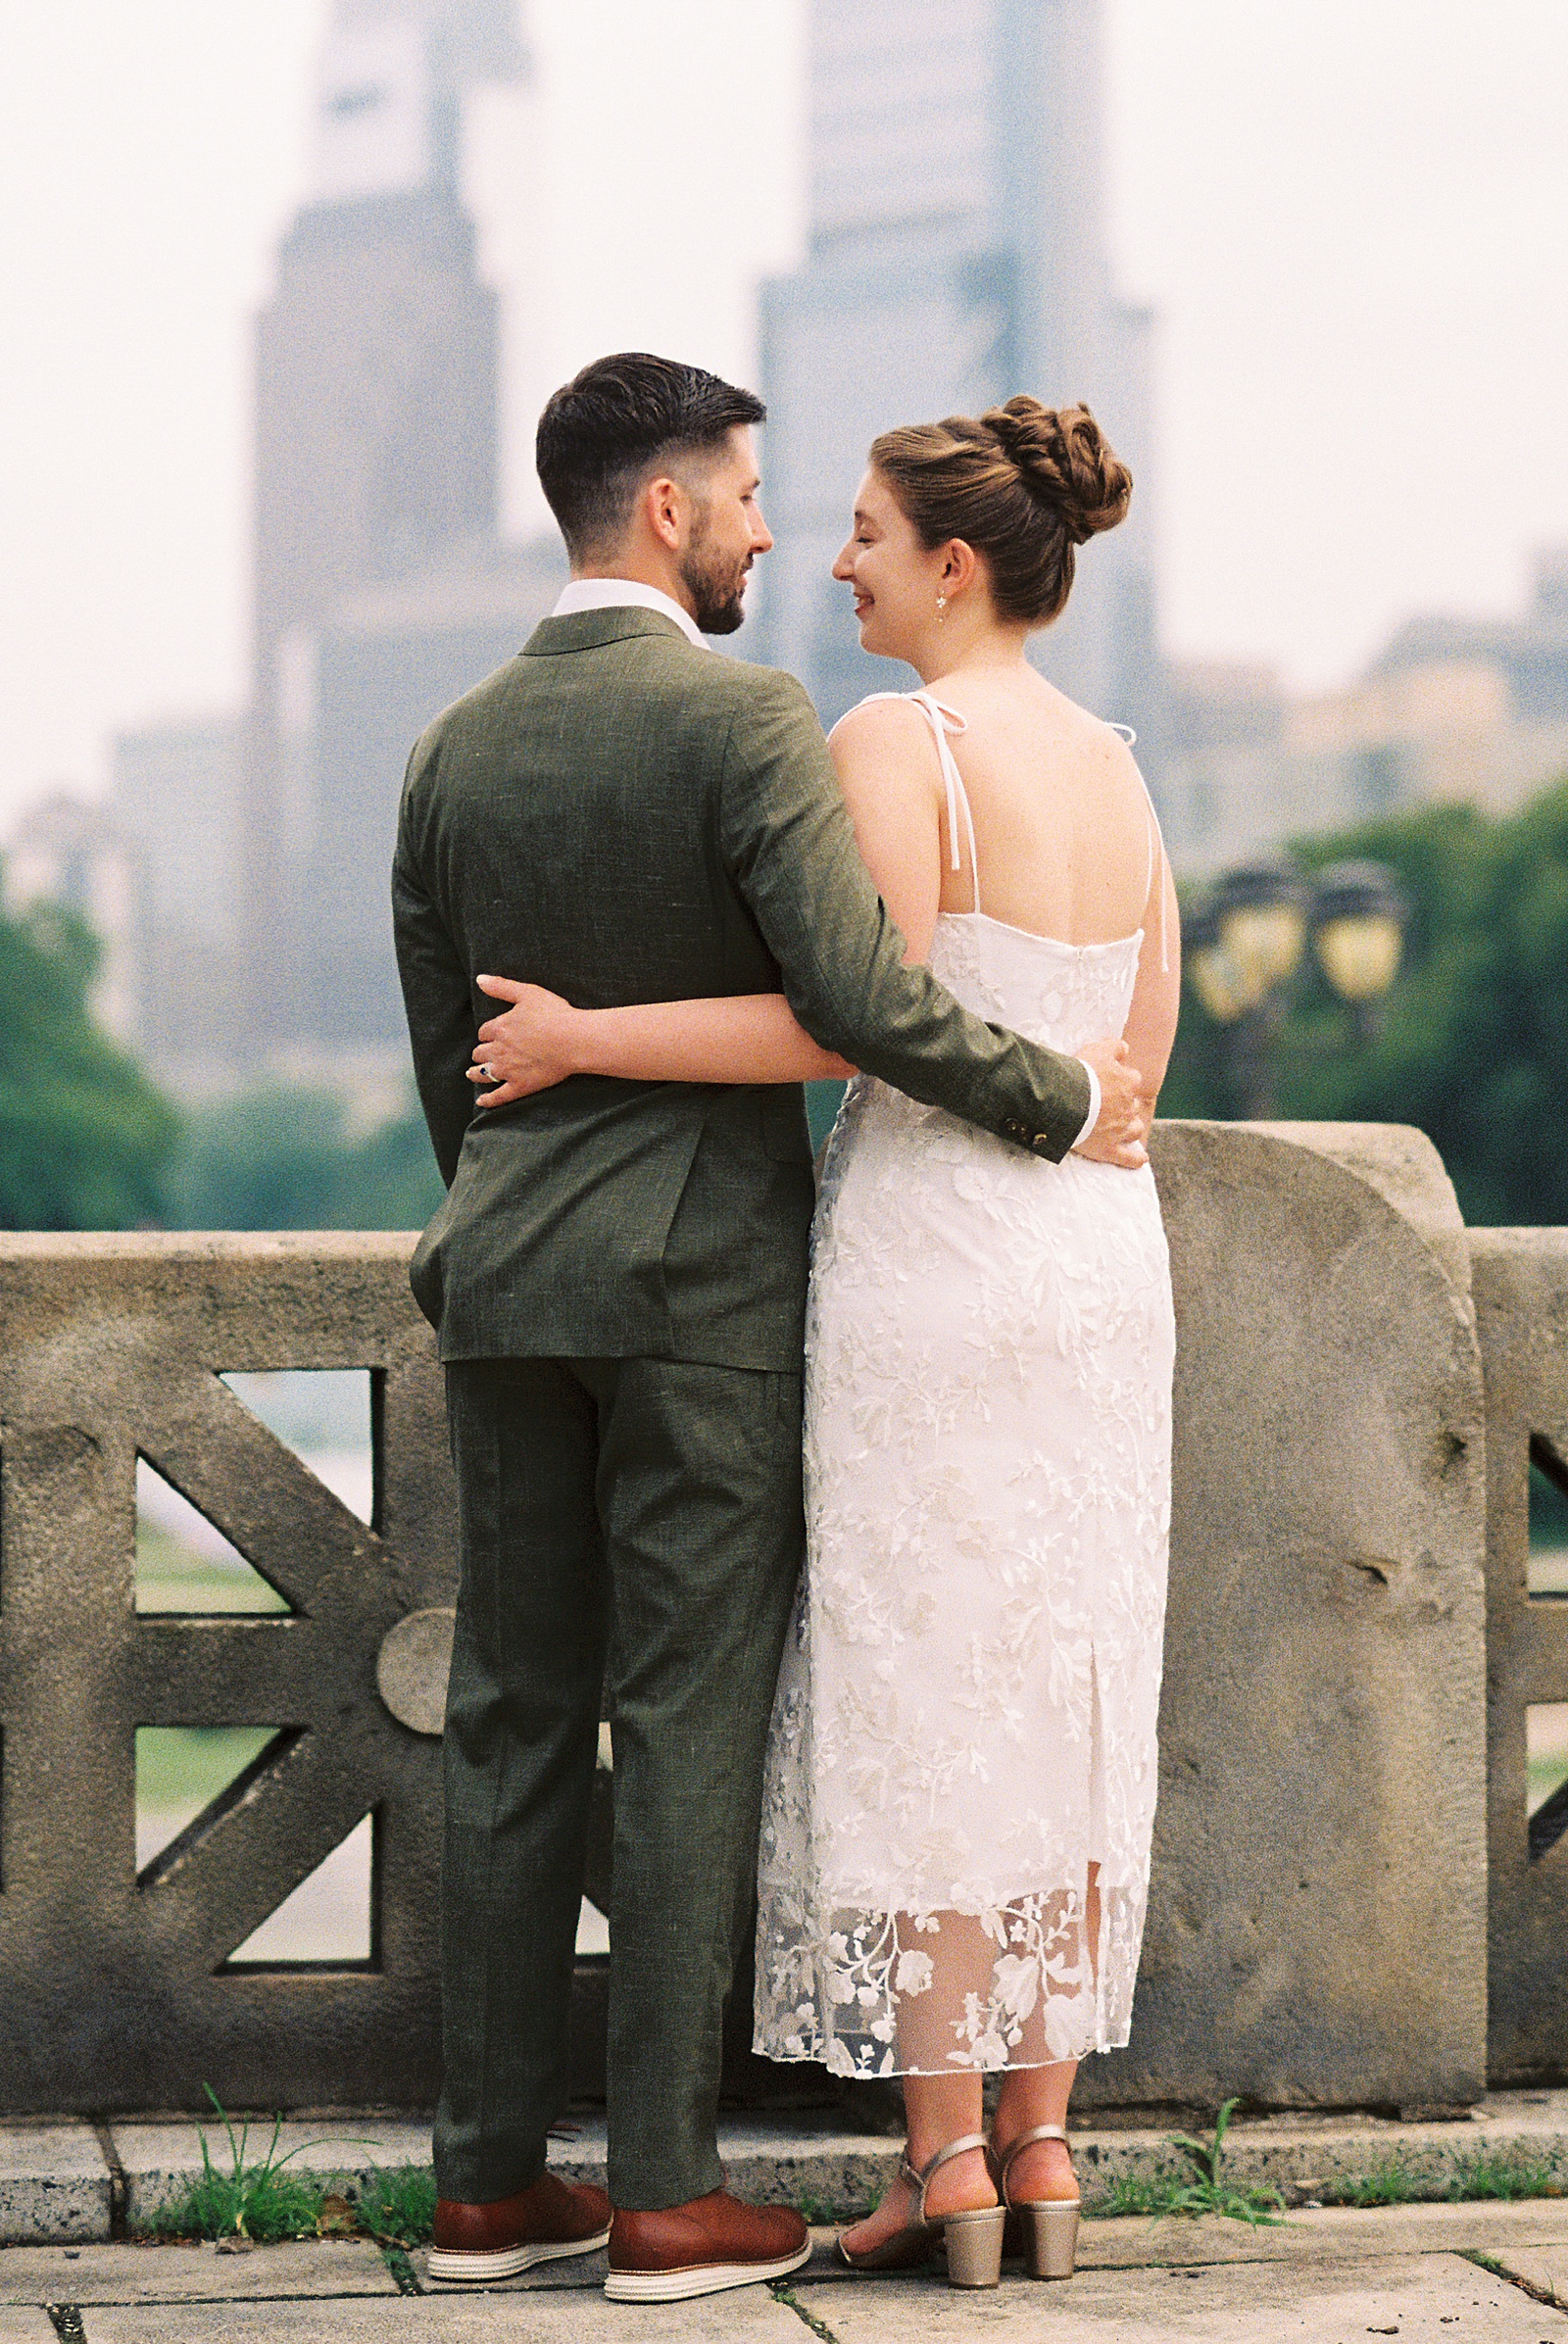 A bride and groom stand with their arms around each other's waists as they look at Philadelphia skyscrapers in the distance.